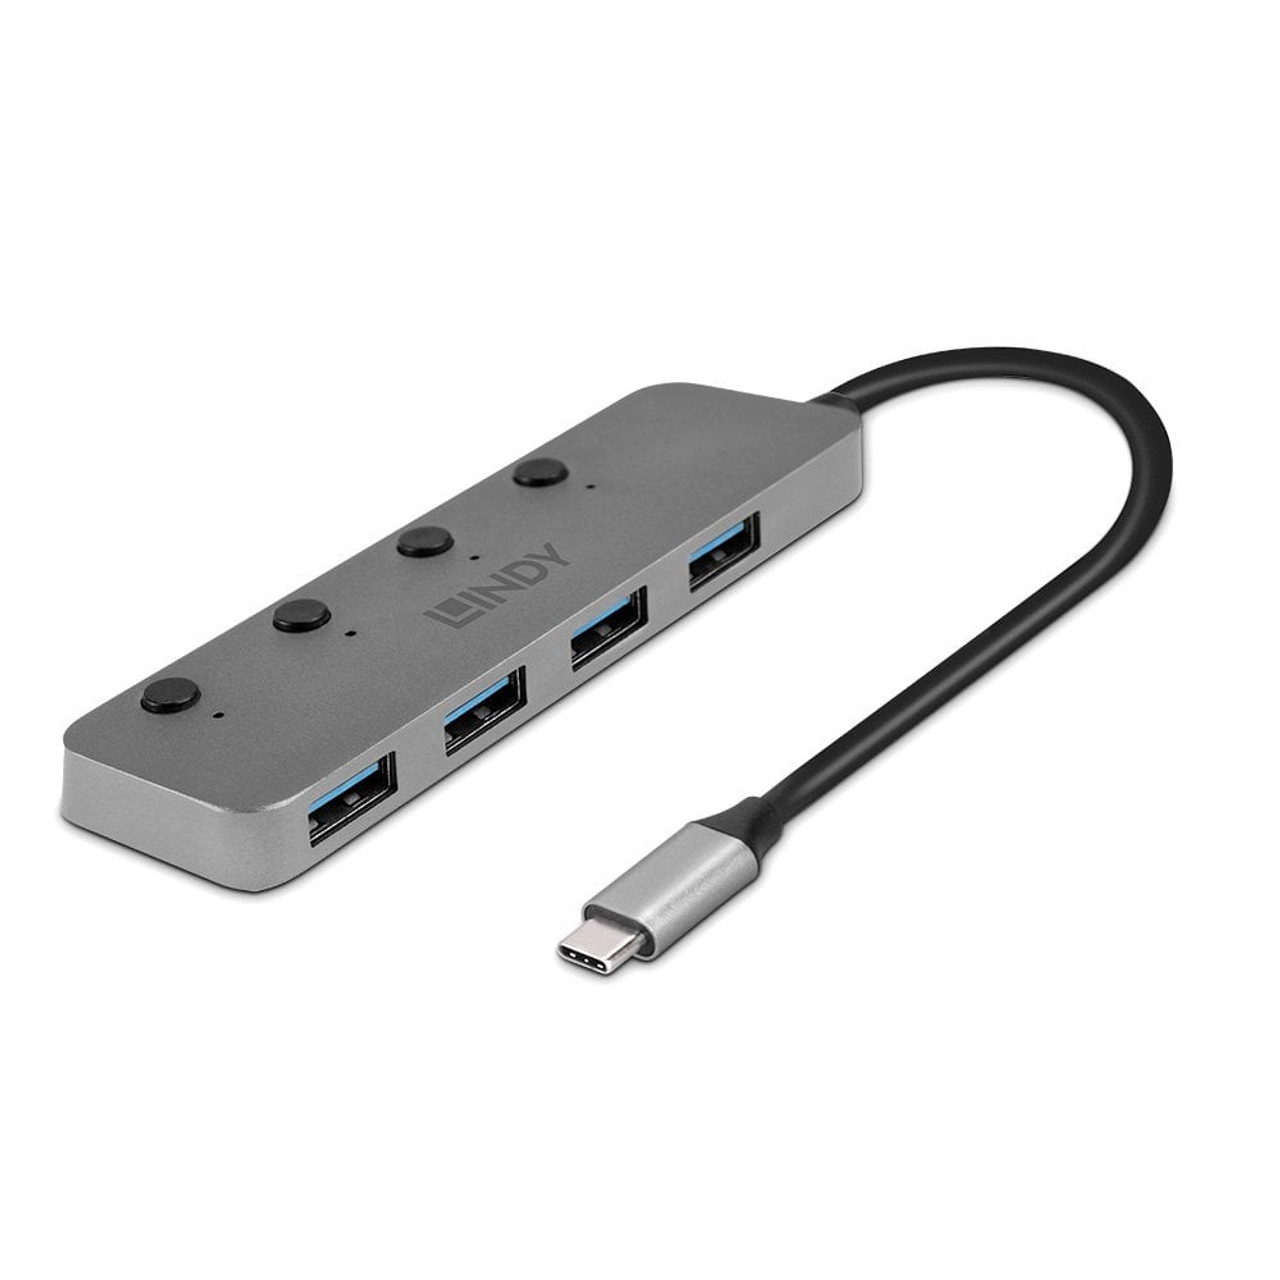 Lindy 4 Port USB 3.1 Gen 2 Typ C Hub with Power Delivery White